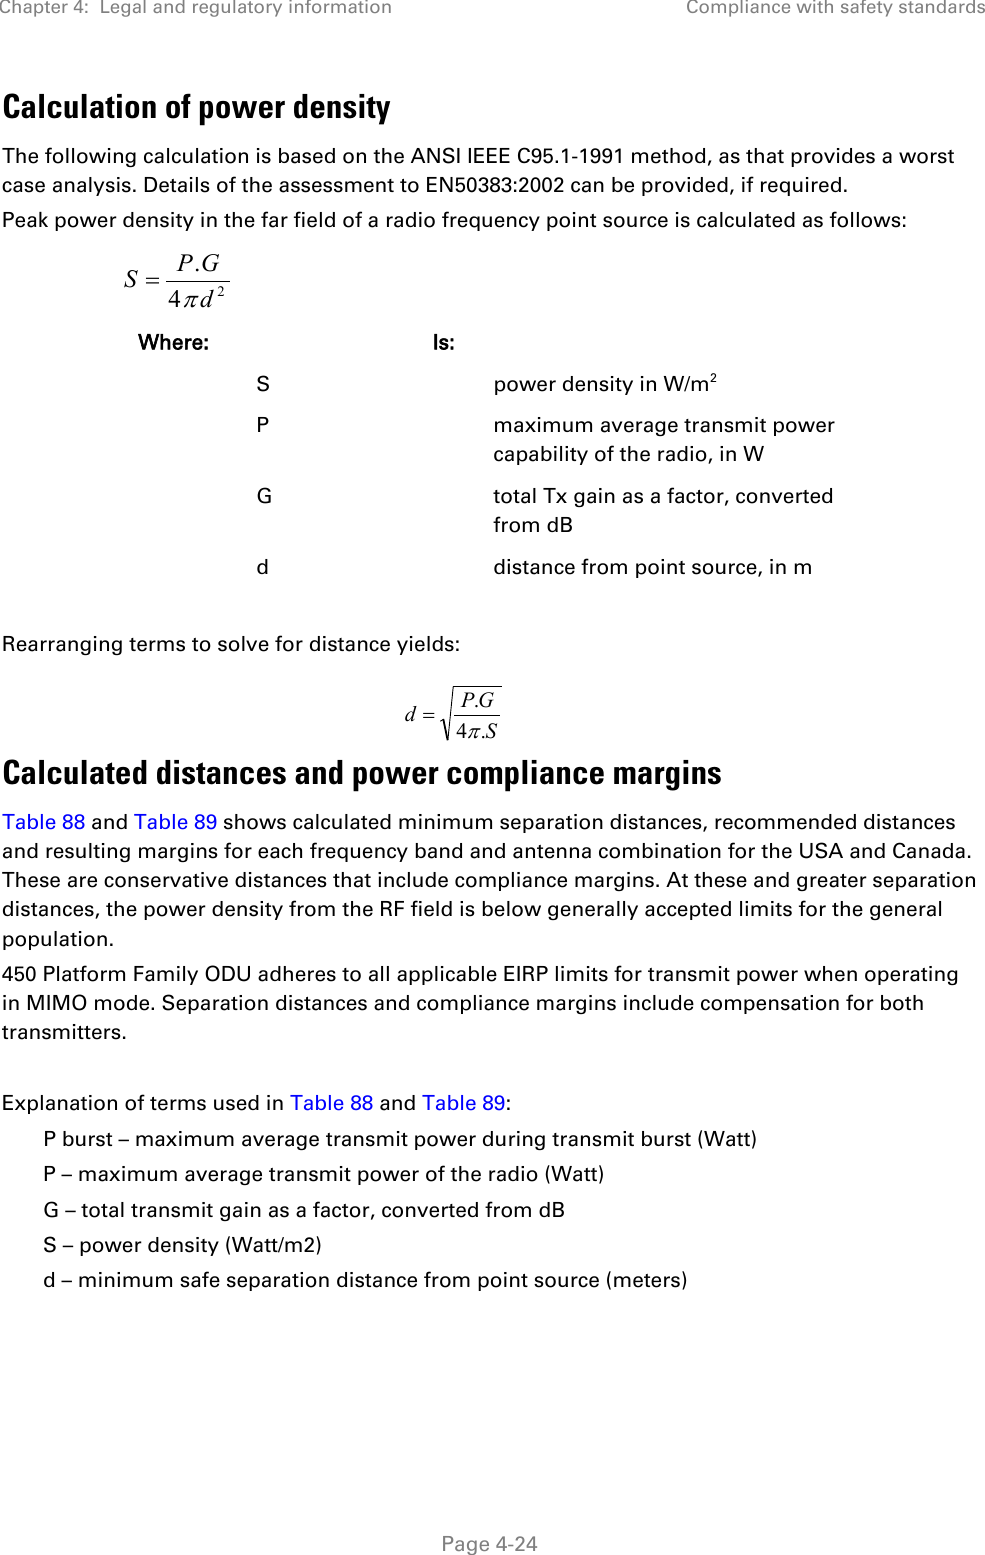 Chapter 4:  Legal and regulatory information Compliance with safety standards   Page 4-24 Calculation of power density The following calculation is based on the ANSI IEEE C95.1-1991 method, as that provides a worst case analysis. Details of the assessment to EN50383:2002 can be provided, if required. Peak power density in the far field of a radio frequency point source is calculated as follows:   Where:  Is:    S    power density in W/m2   P    maximum average transmit power capability of the radio, in W   G    total Tx gain as a factor, converted from dB   d    distance from point source, in m  Rearranging terms to solve for distance yields:   Calculated distances and power compliance margins Table 88 and Table 89 shows calculated minimum separation distances, recommended distances and resulting margins for each frequency band and antenna combination for the USA and Canada. These are conservative distances that include compliance margins. At these and greater separation distances, the power density from the RF field is below generally accepted limits for the general population. 450 Platform Family ODU adheres to all applicable EIRP limits for transmit power when operating in MIMO mode. Separation distances and compliance margins include compensation for both transmitters.  Explanation of terms used in Table 88 and Table 89: P burst – maximum average transmit power during transmit burst (Watt) P – maximum average transmit power of the radio (Watt) G – total transmit gain as a factor, converted from dB S – power density (Watt/m2) d – minimum safe separation distance from point source (meters)  24.dGPSπ=SGPd.4.π=